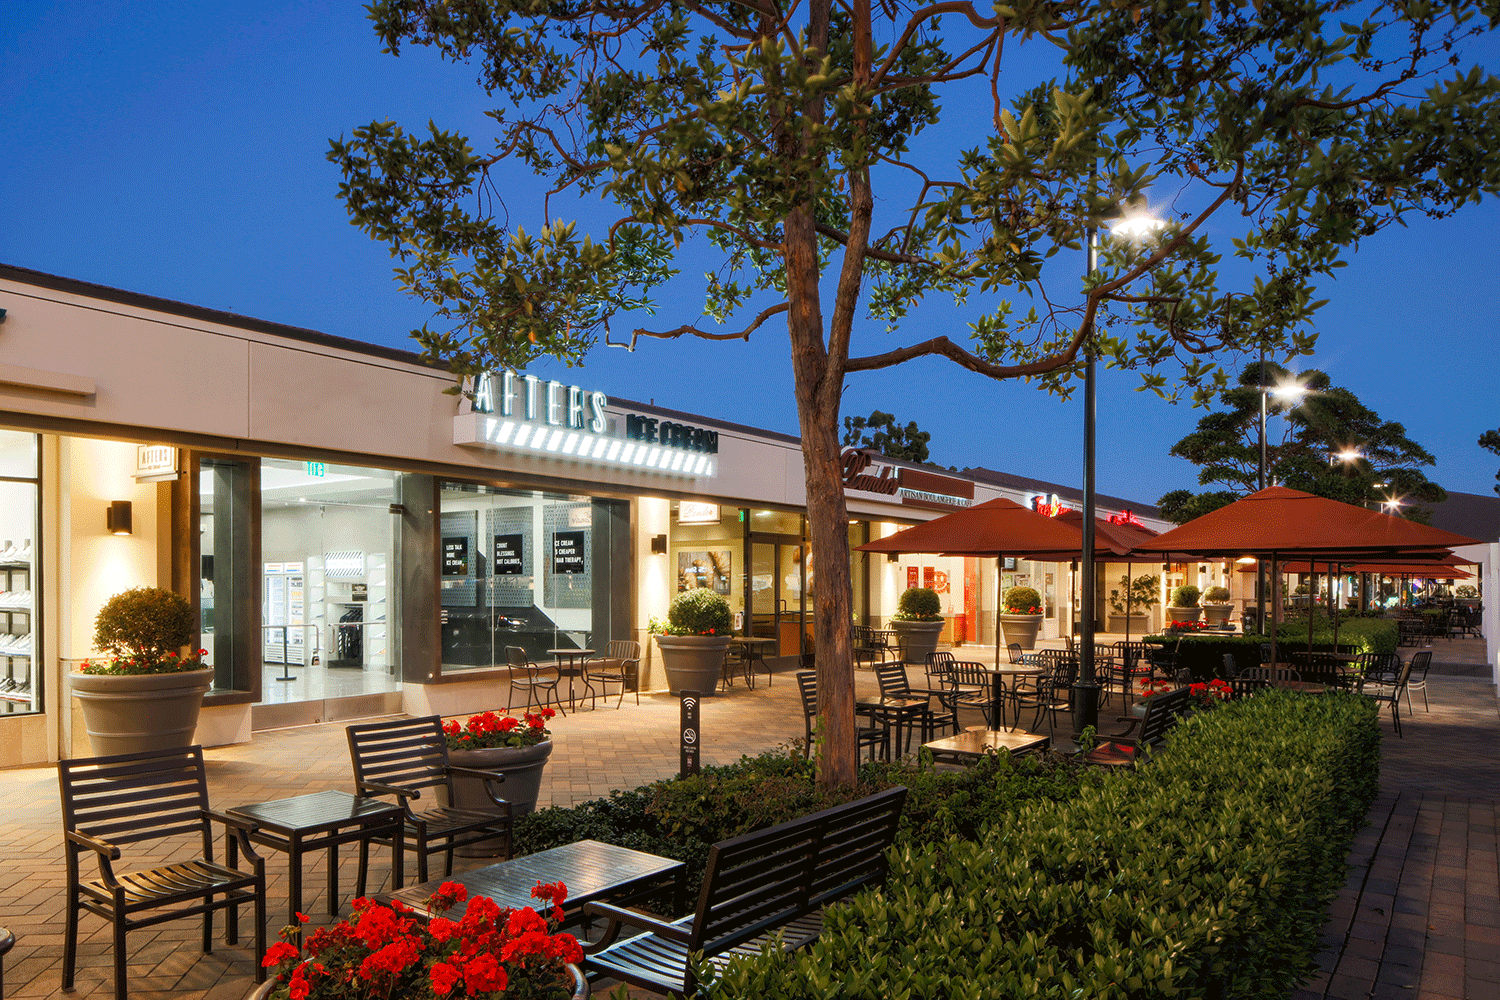  Exterior view of Westcliff Plaza at dusk